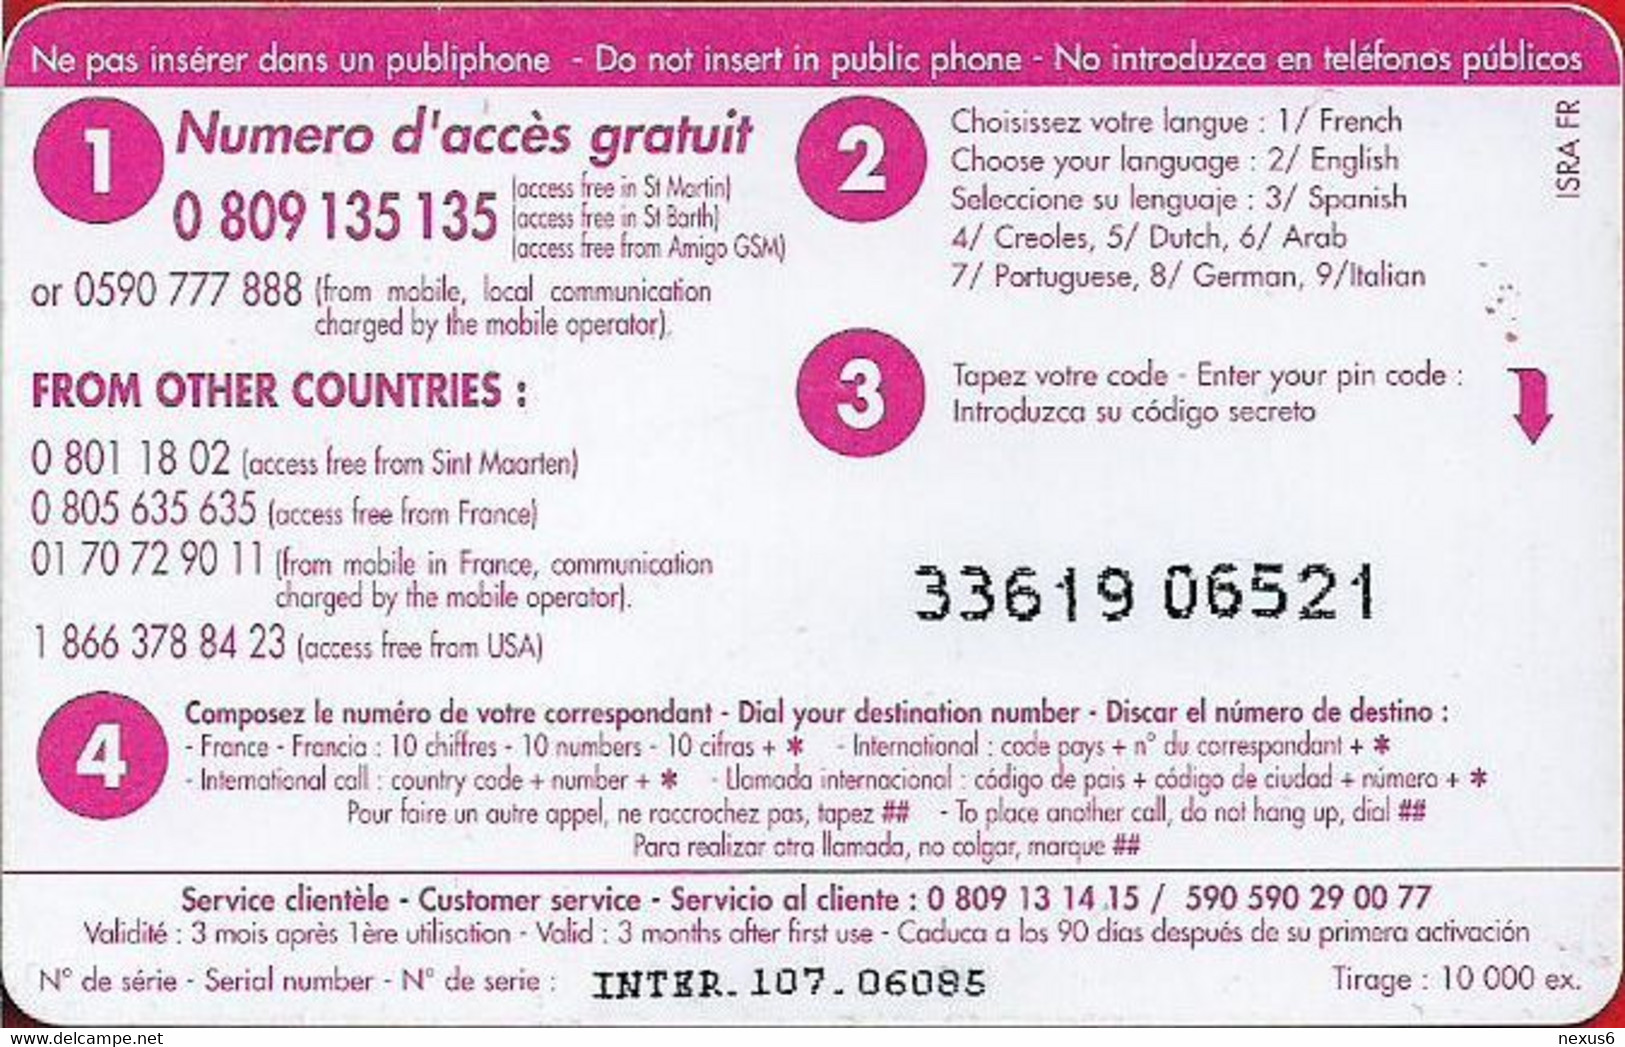 French Antilles - Dauphin Telecom (InterCard) - Fort Louis Marigot, Remote Mem. 5€, 10.000ex, Used - Antilles (French)